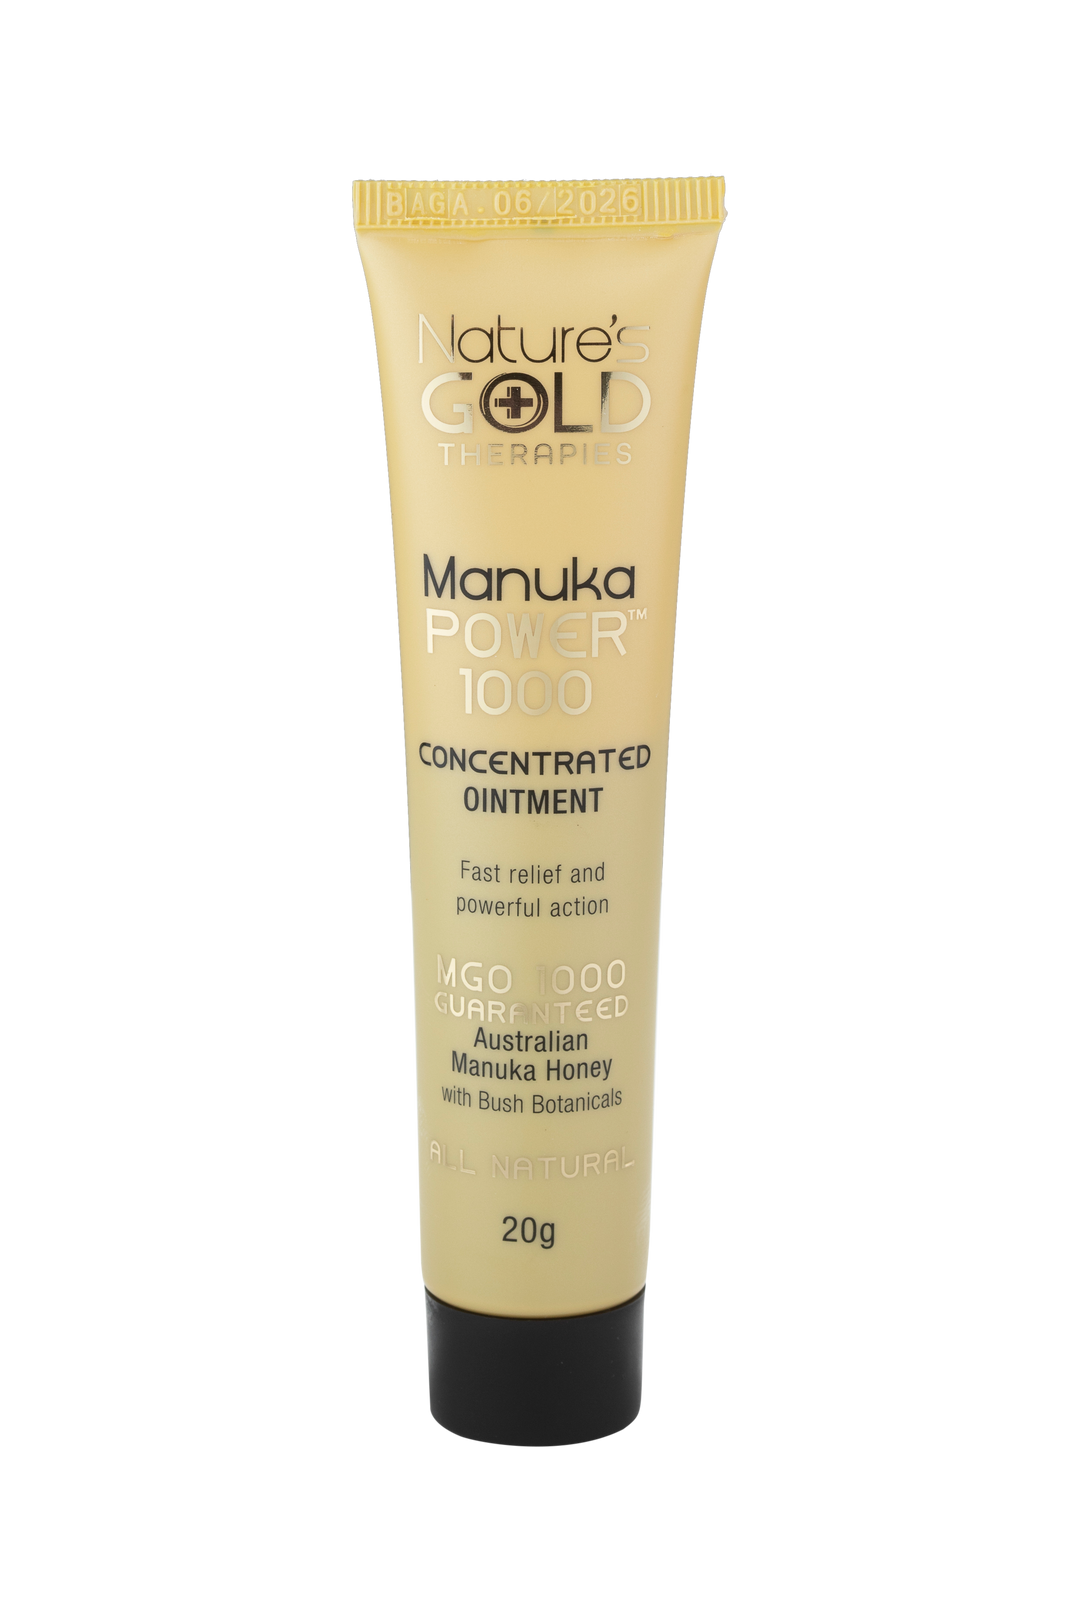 Manuka power 1000 concentrated ointment MGO1000 20g tube